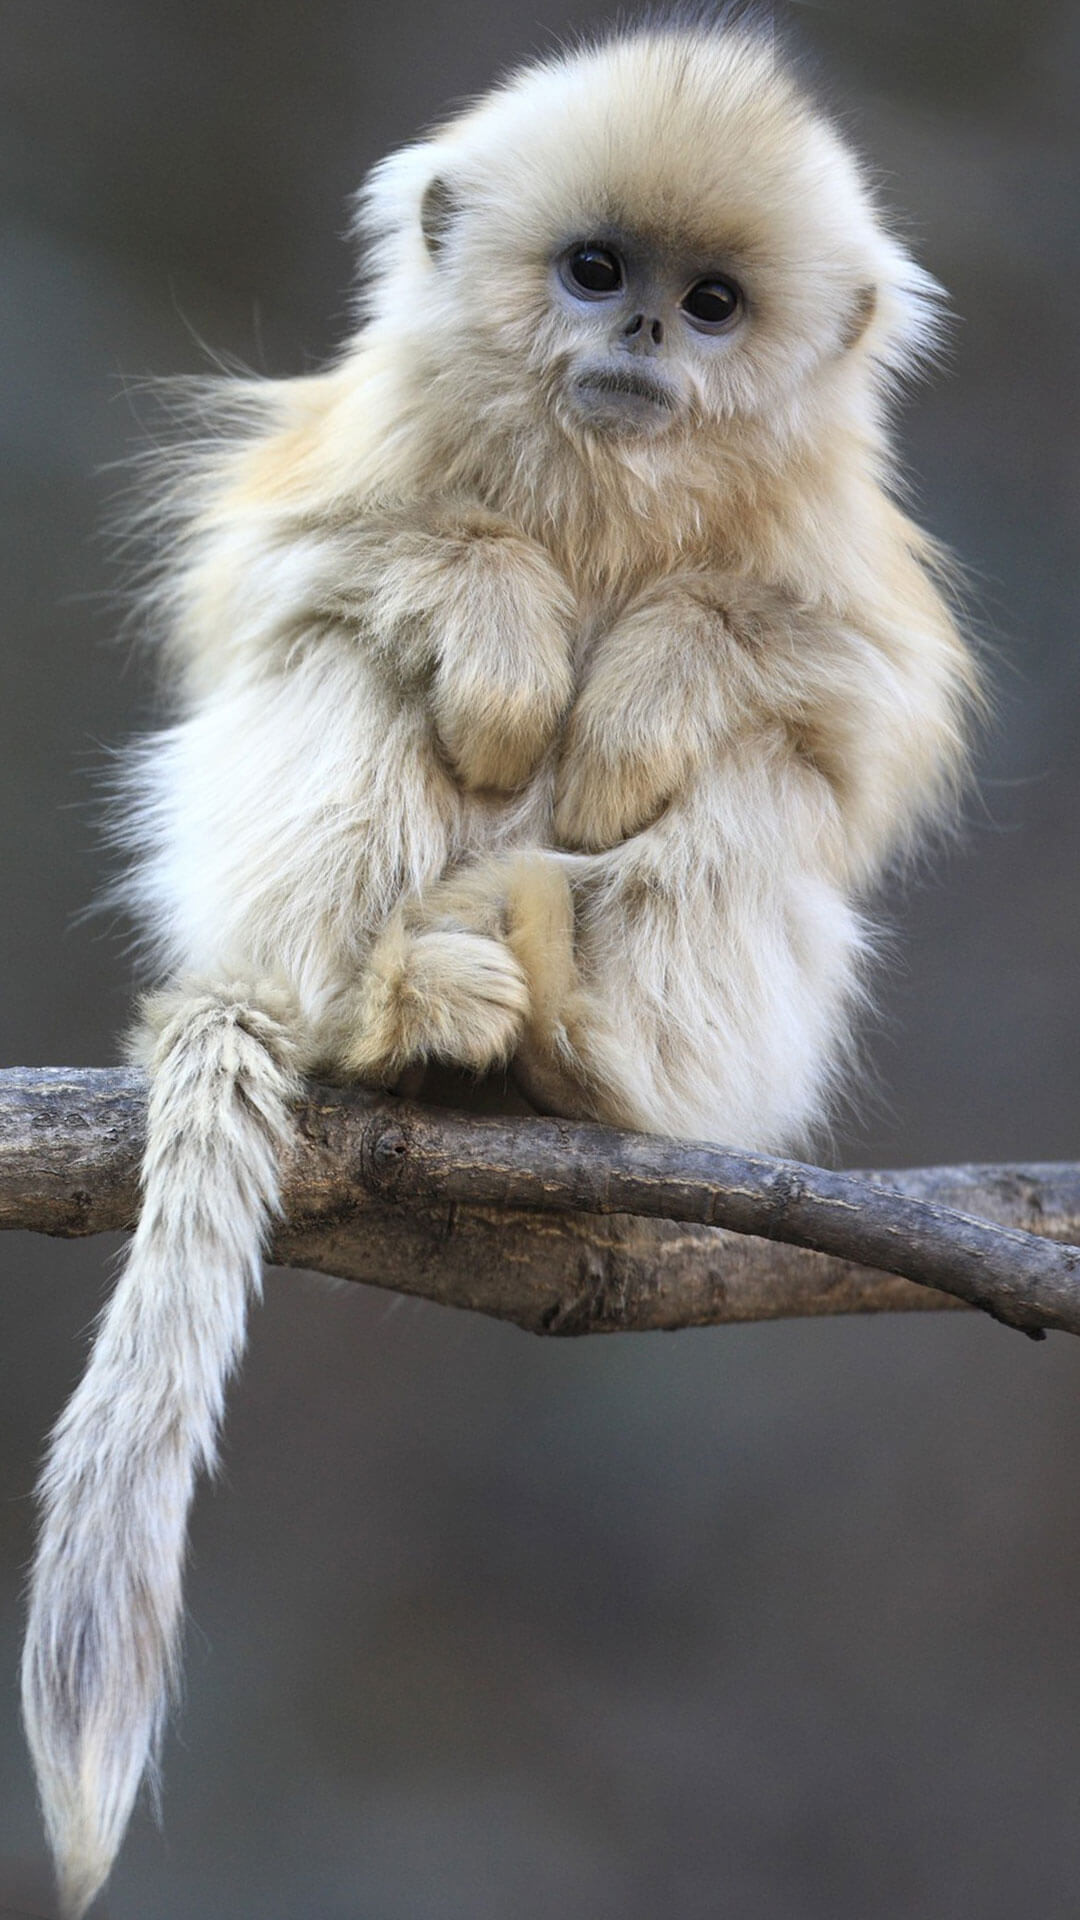 1080x1920 Cute Monkey Wallpaper For iPhone 6 HD | Animal Wallpaper for